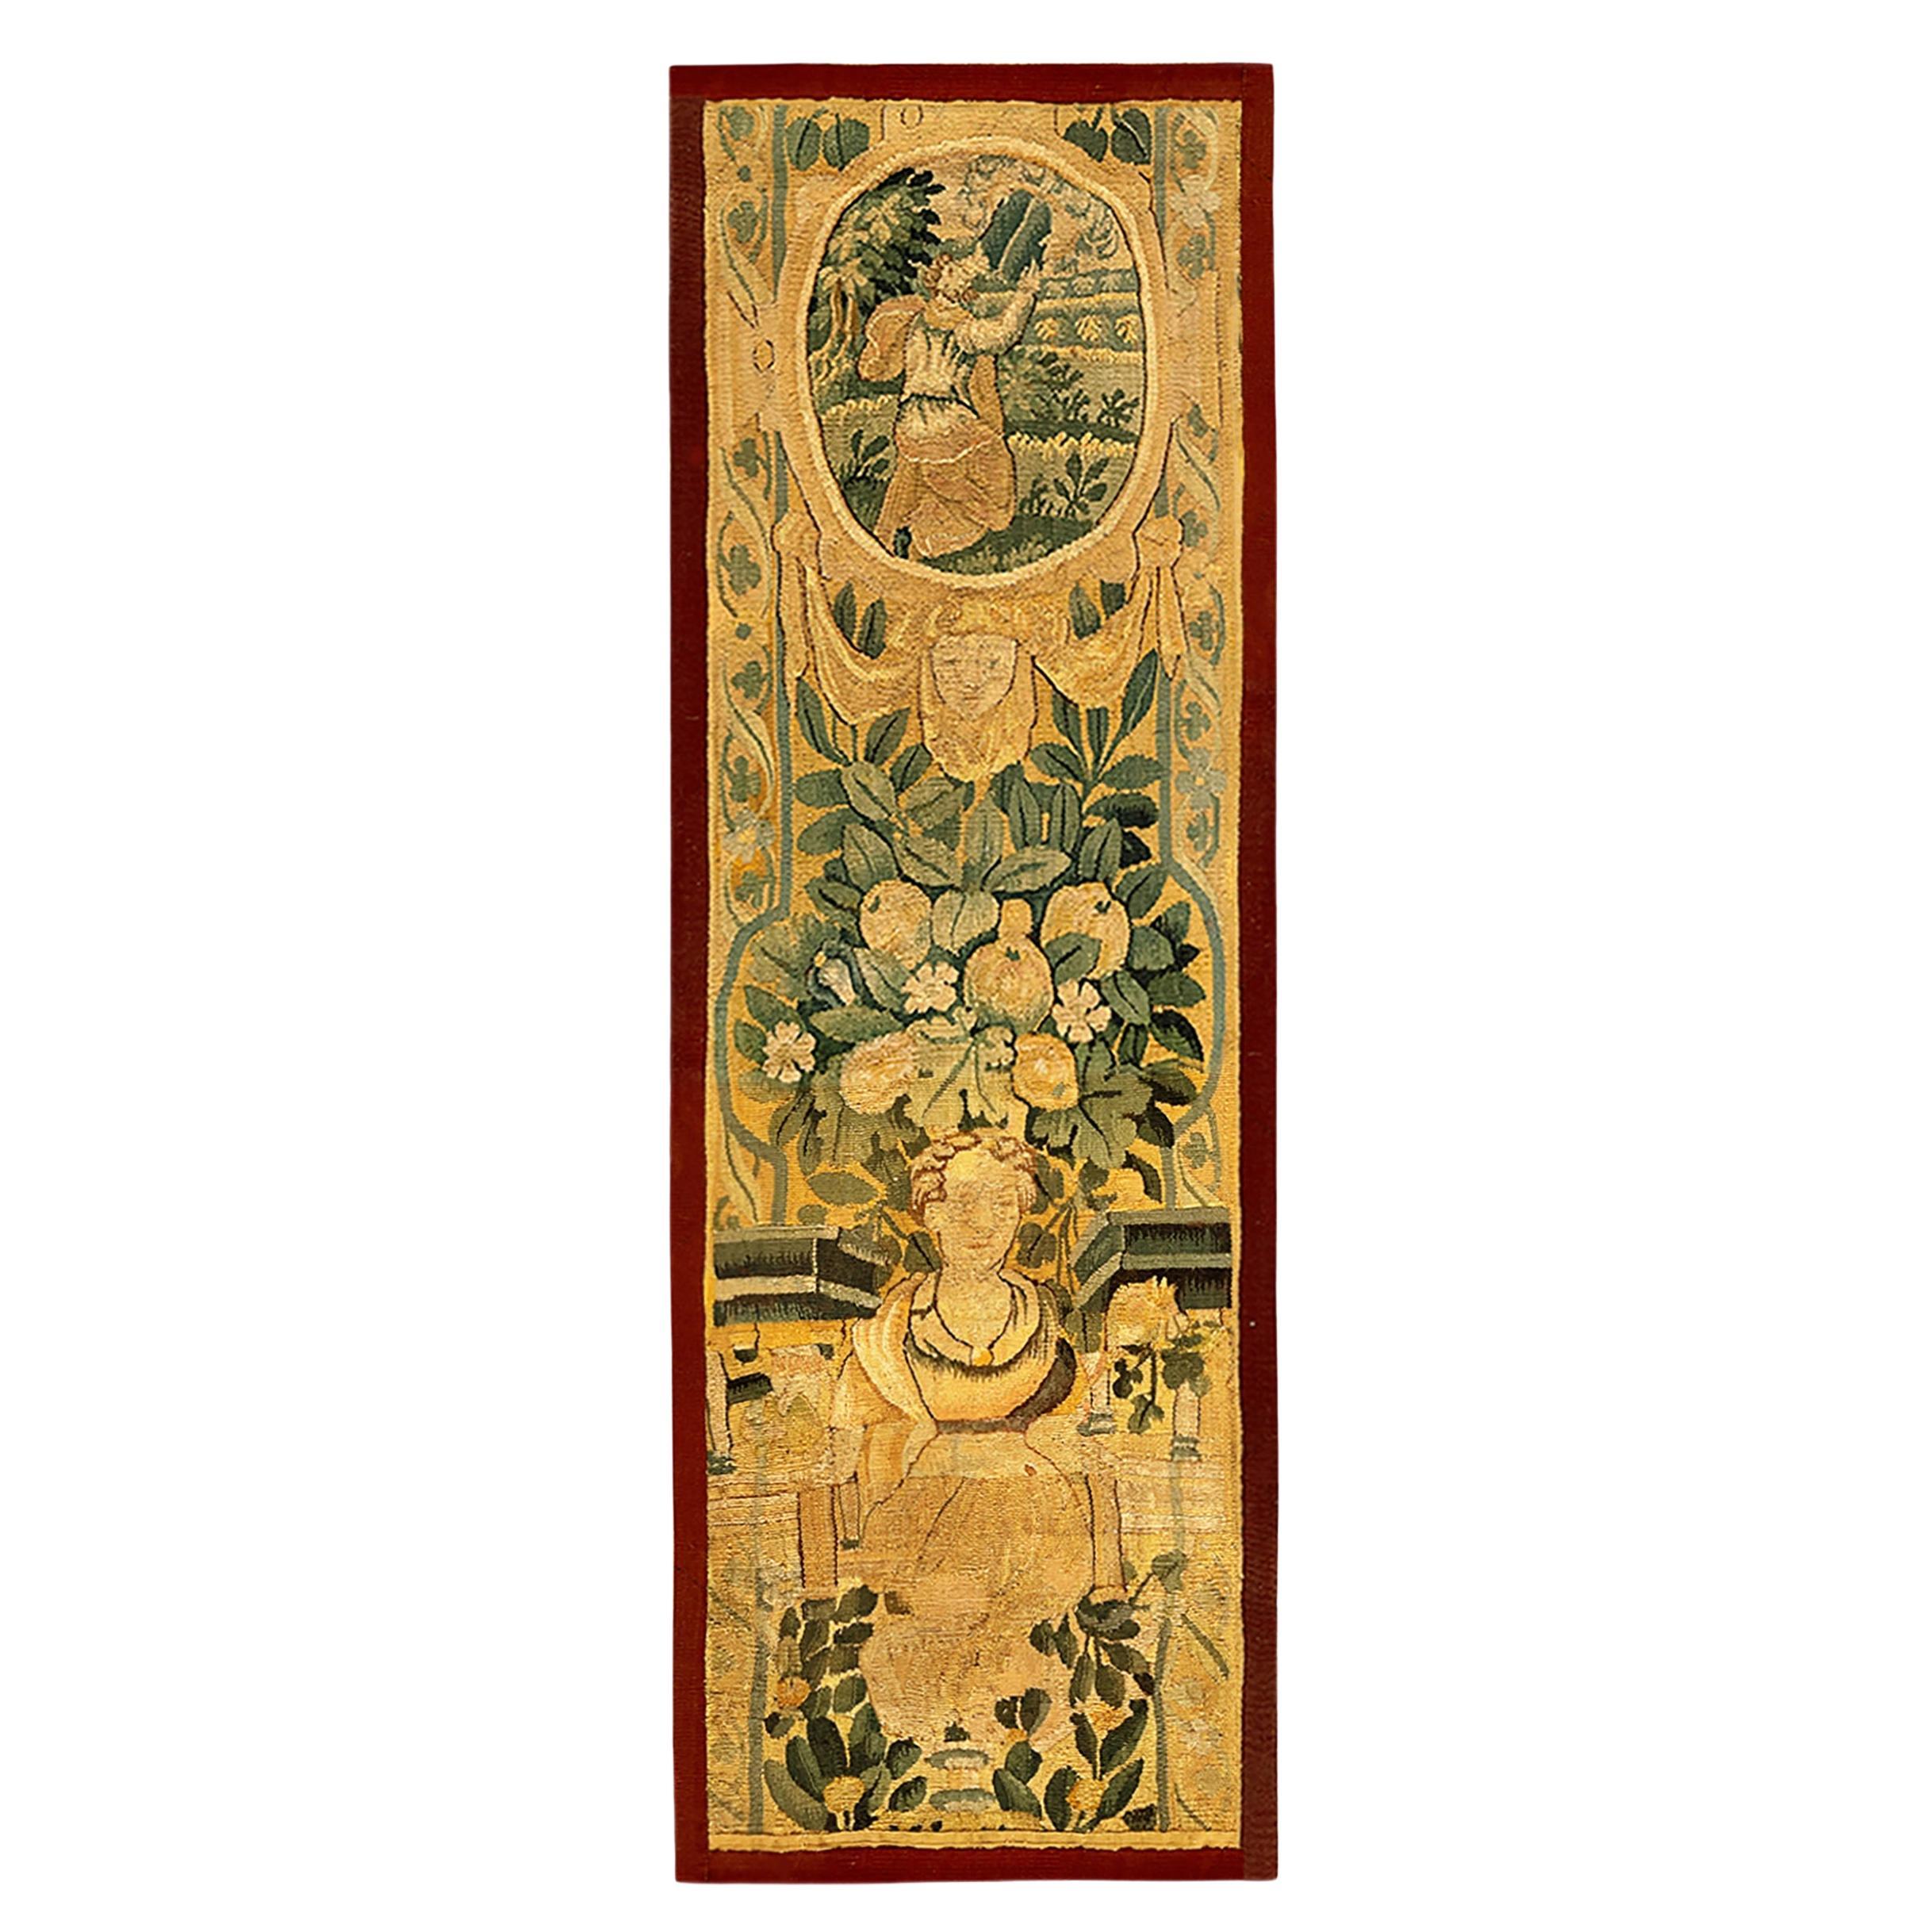 17th Century Flemish Historical Tapestry Panel, Vertically Oriented with Pendant